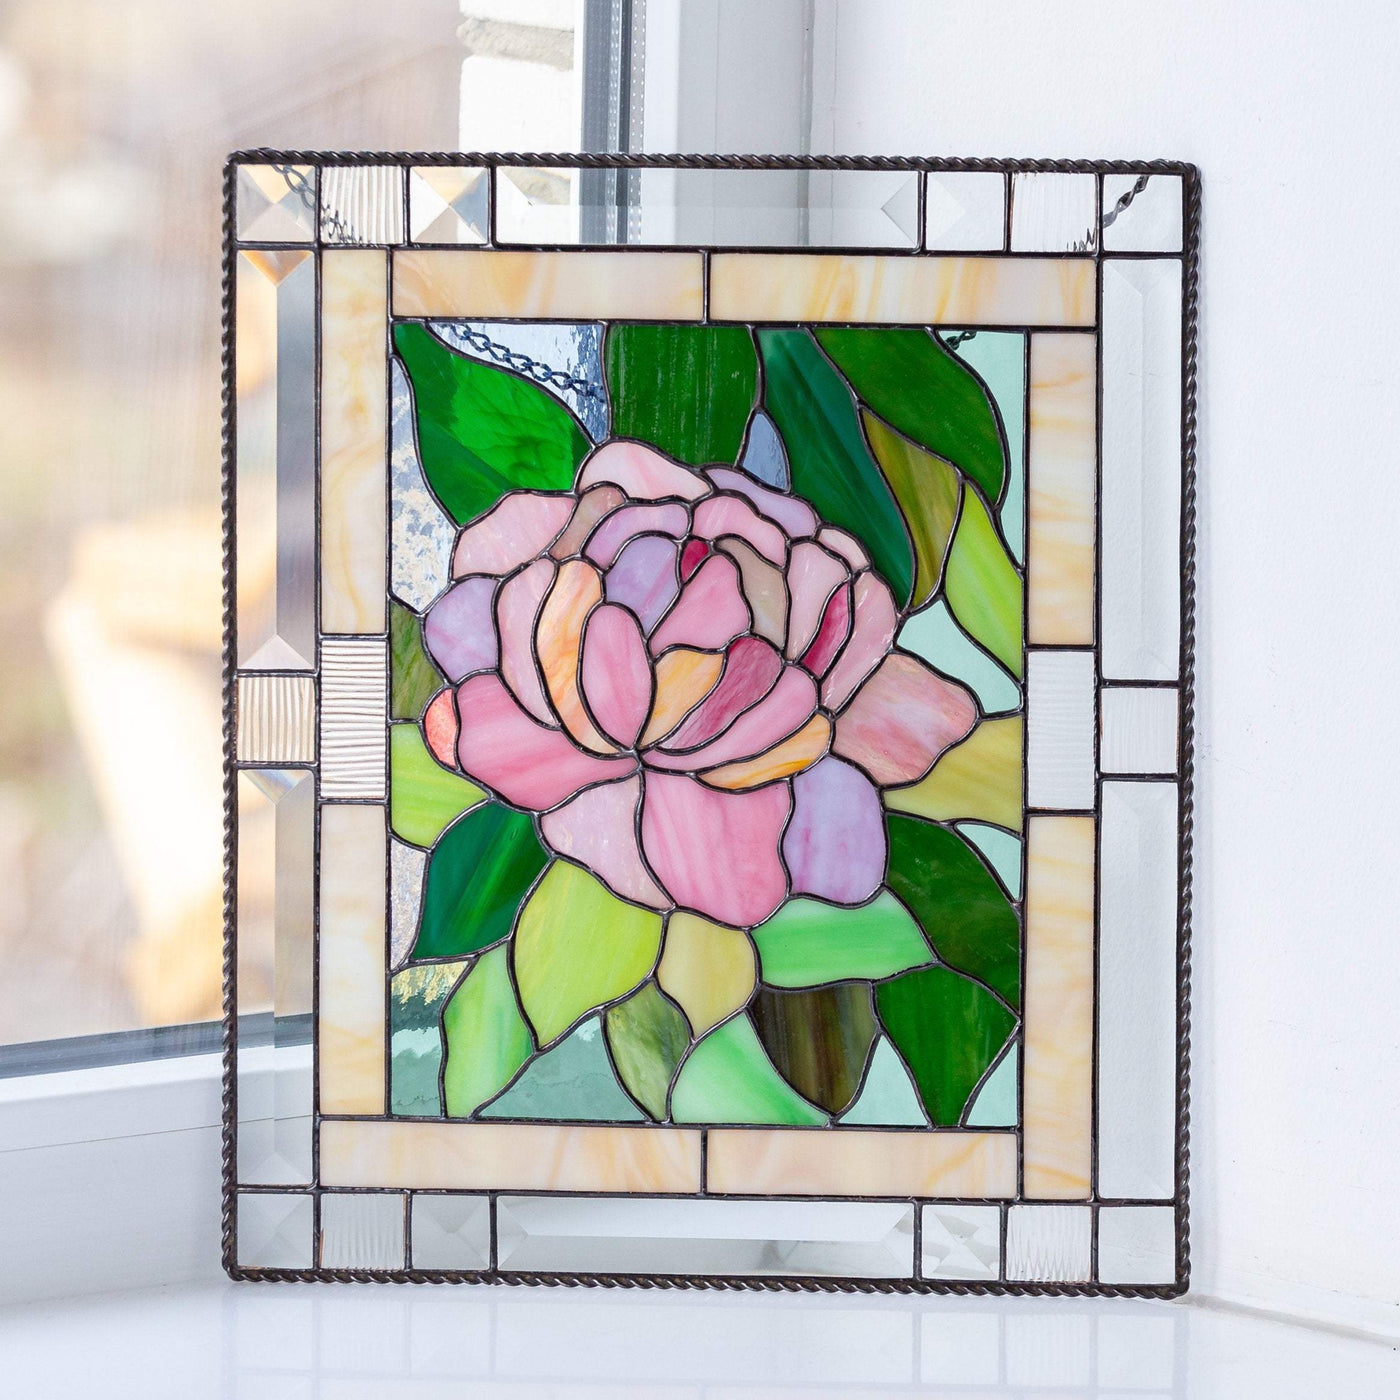 Stained glass peony panel with leaves on the background 